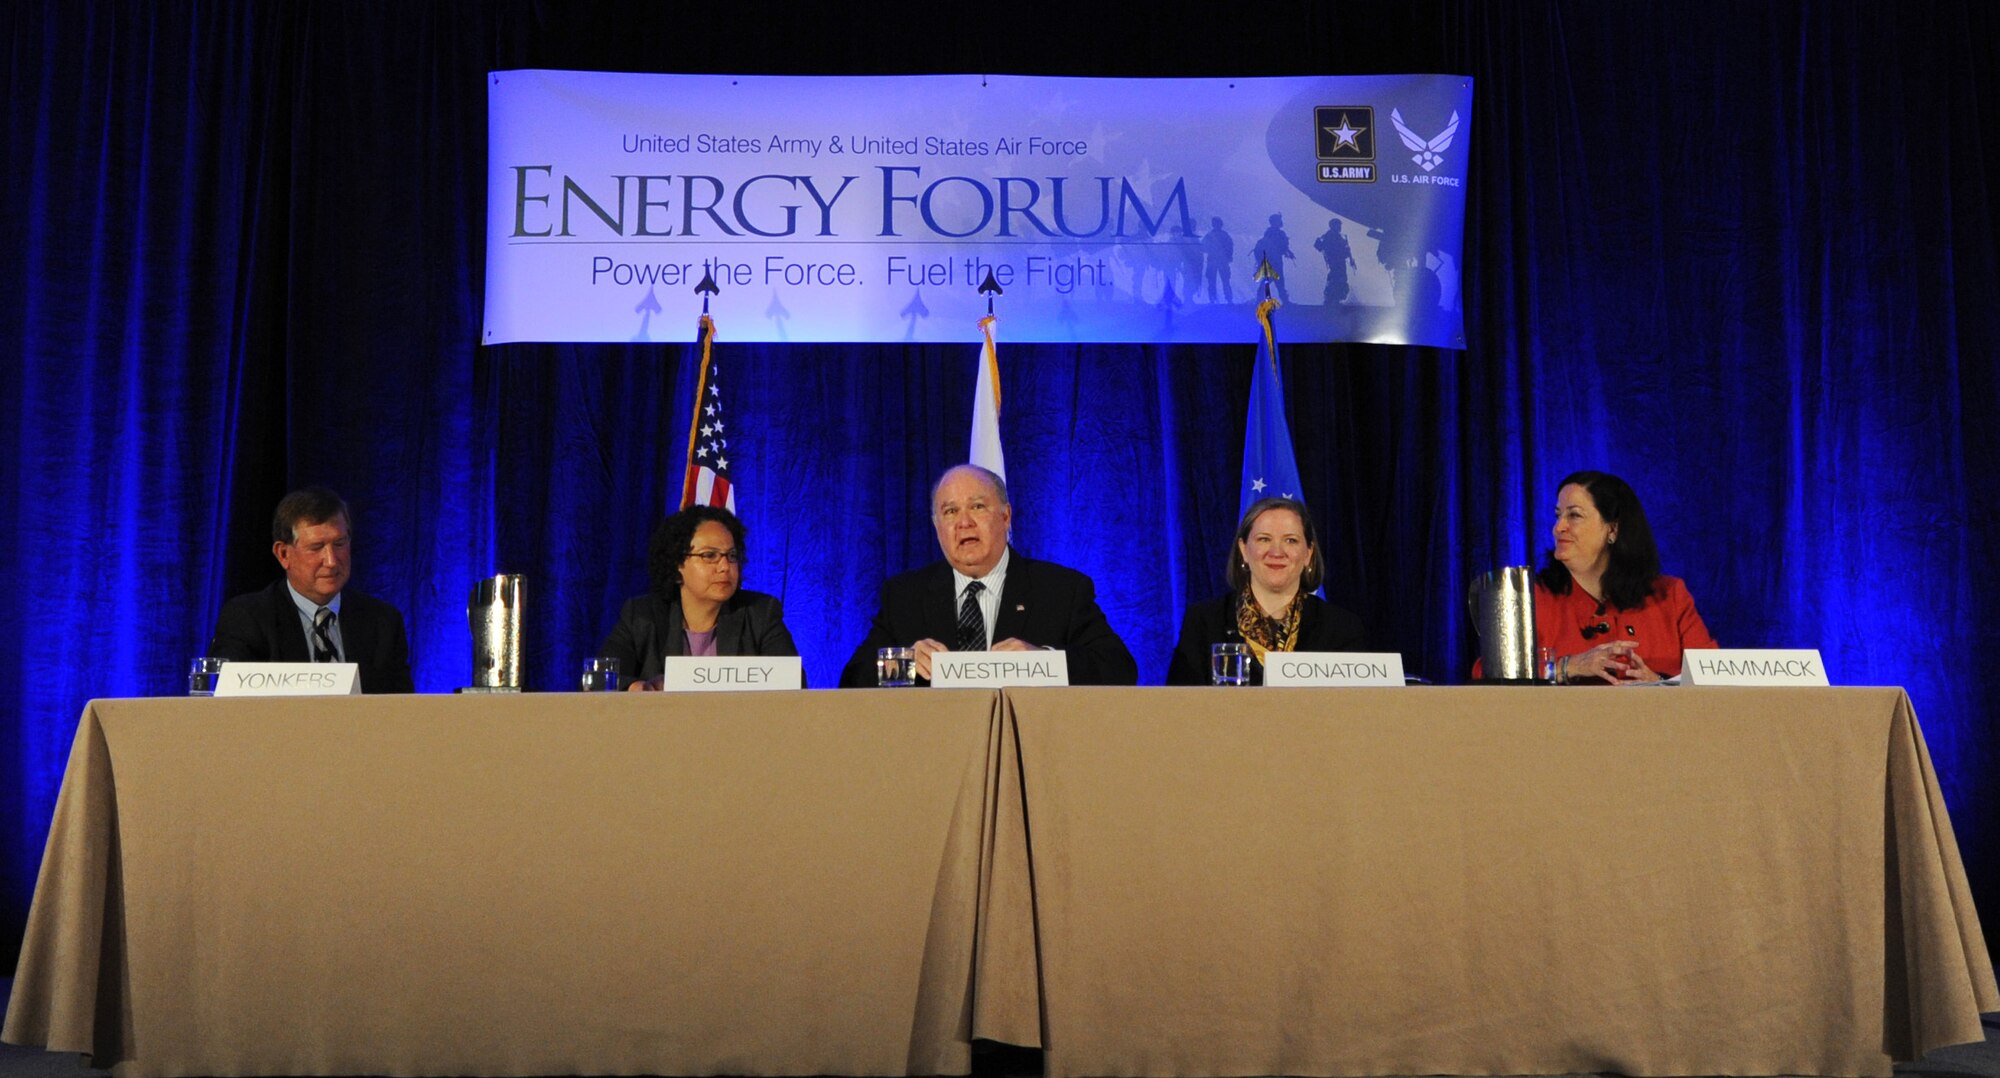 (From left) Assistant Secretary of the Air Force for Installations, Environment and Logistics Terry Yonkers; Nancy Sutley, Council on Environmental Quality;  Under Secretary of the Army (Dr.) Joseph Westphal; Under Secretary of the Air Force Erin Conaton and Assistant Secretary of the Army for Installations, Energy and Environment Katherine Hammack sit on a panel together during the Army-Air Force Energy Forum, July 19, 2011, in Arlington, Va.  The forum provided an opportunity for attendees to hear the views of and interact with senior leadership from the Department of Defense, federal agencies, Congress and industry regarding the strategic importance and future direction of Army and Air Force energy. (U.S. Air Force photo/Staff Sgt. Tiffany Trojca) 